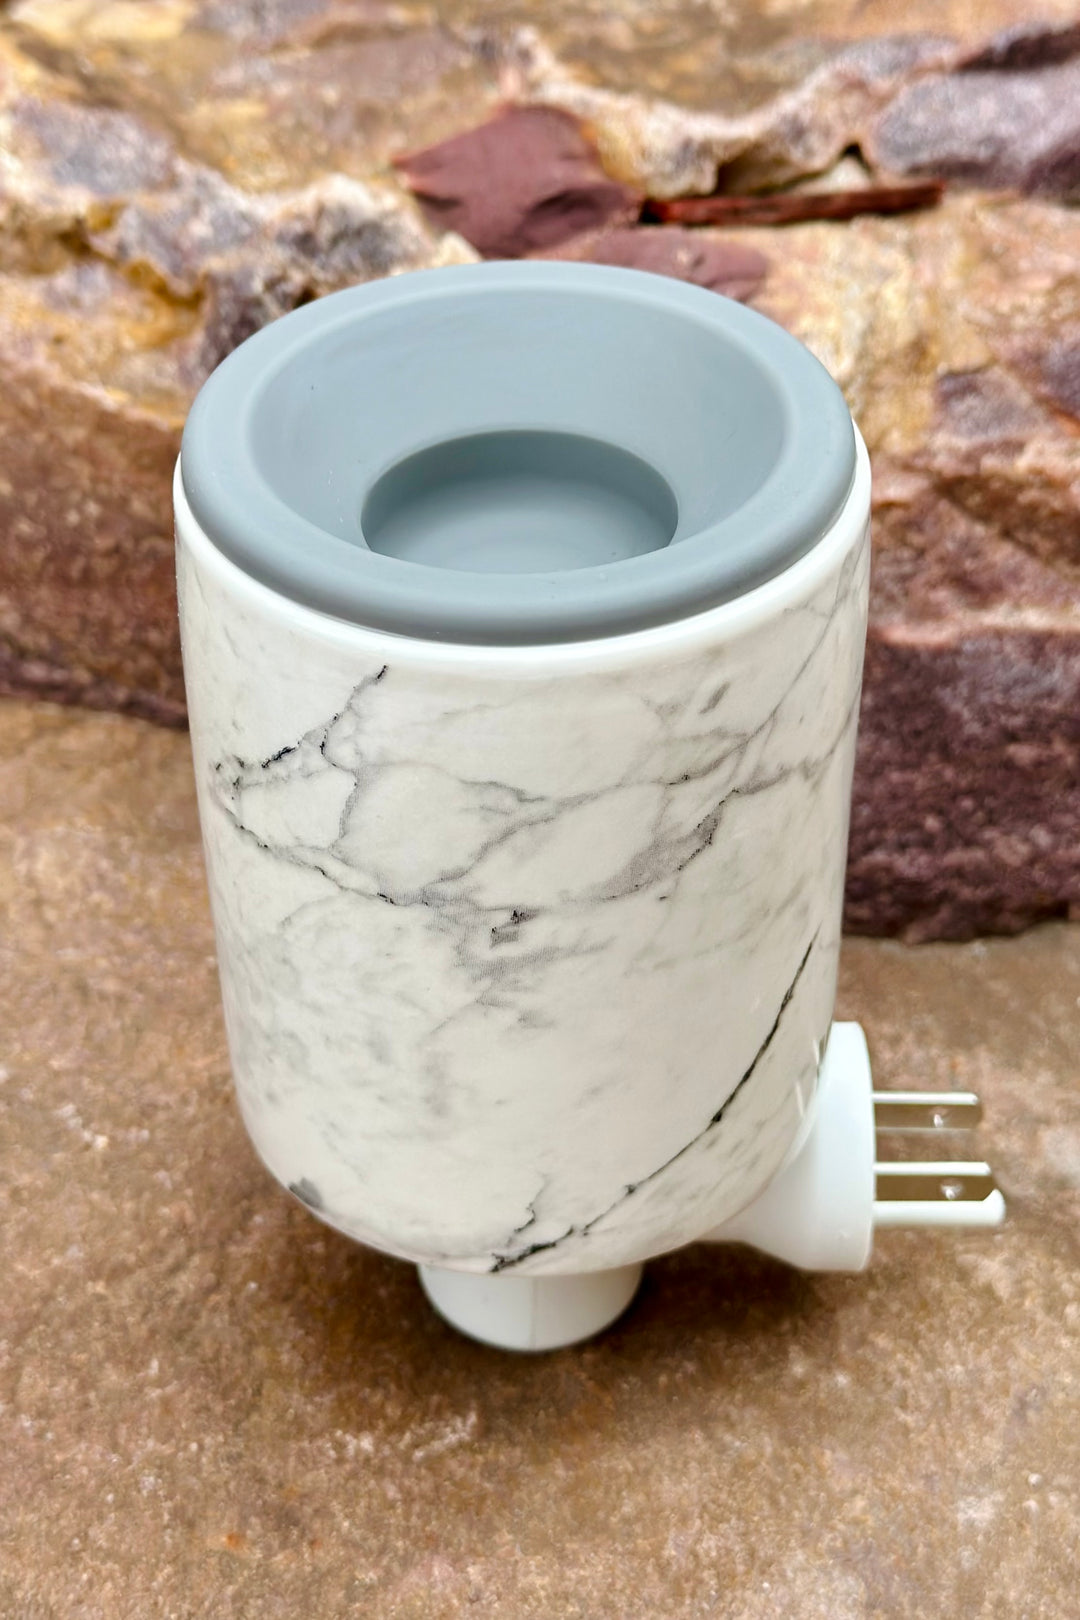 Outlet Wax Warmer: Marble